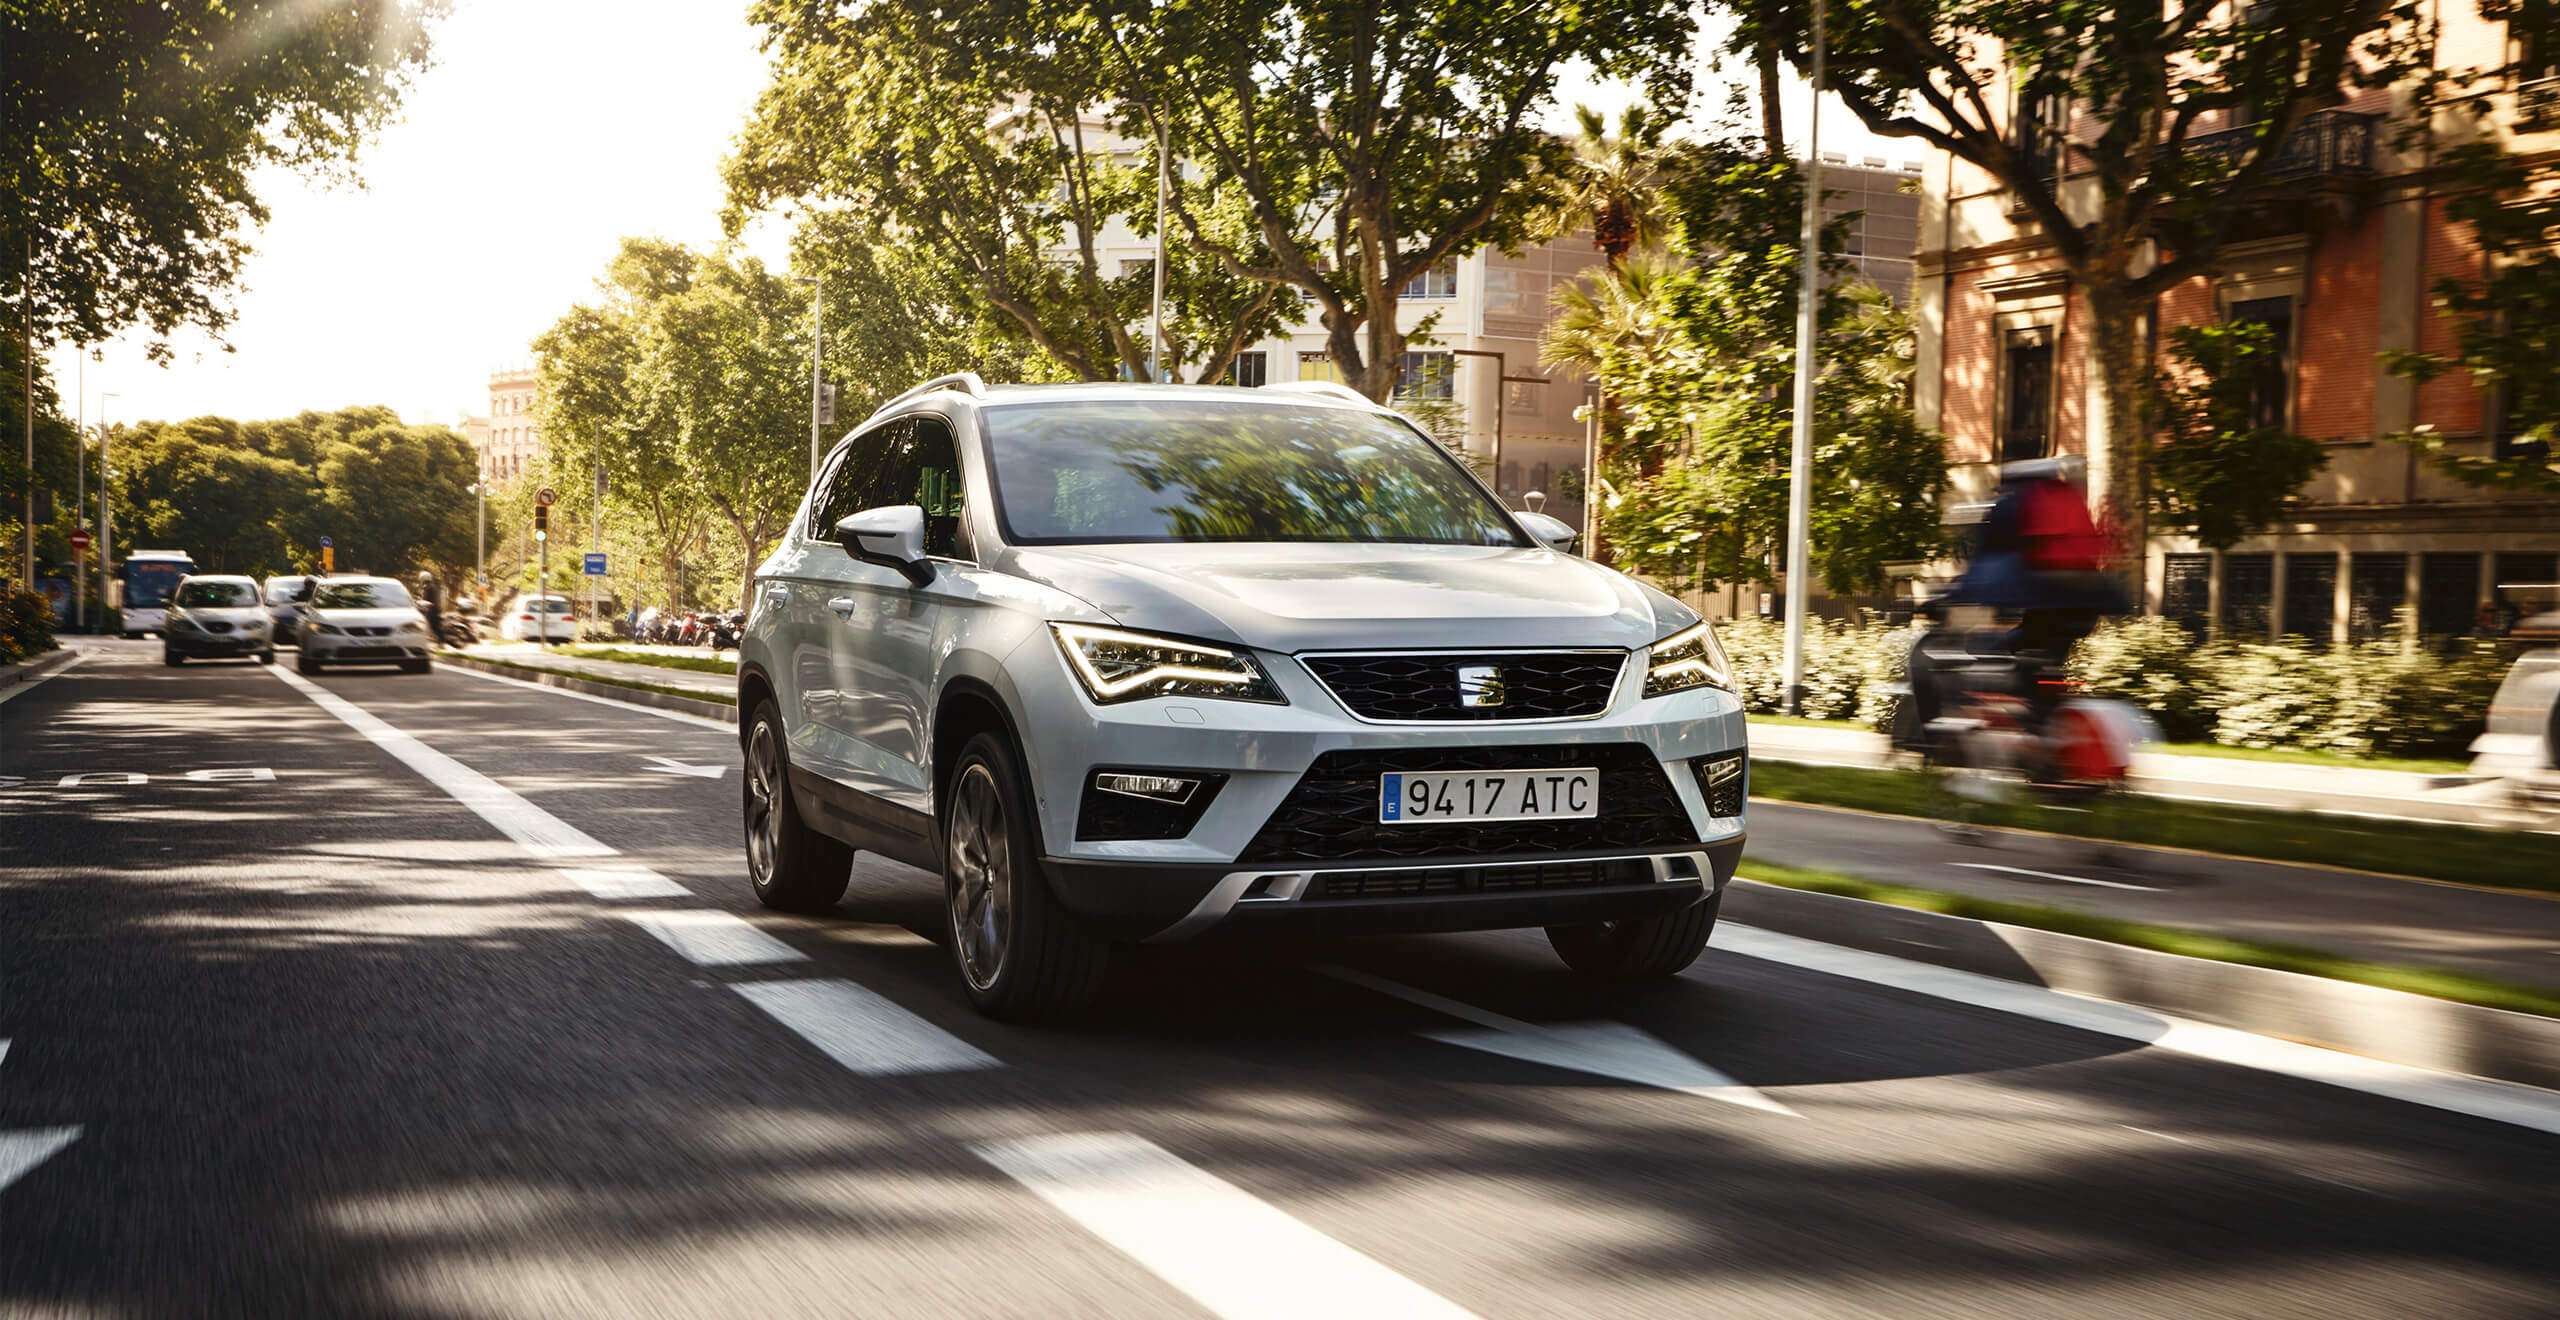 SEAT new car services and maintenance two year warranty – SEAT Ateca SUV driving on a road beside trees